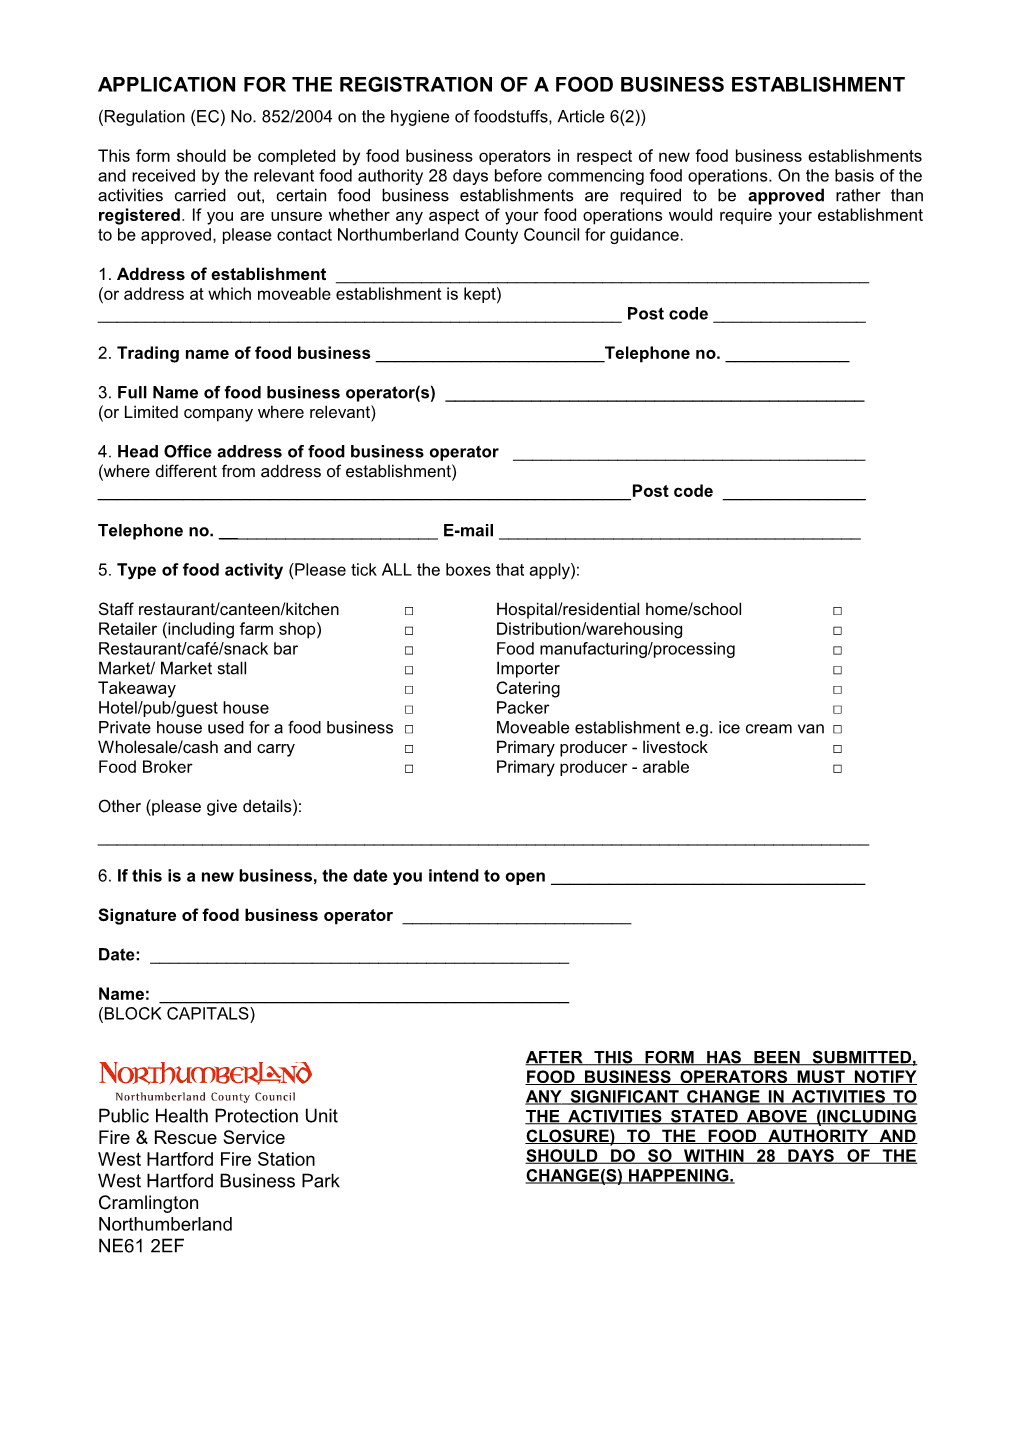 Application for the Registration of a Food Business Establishment